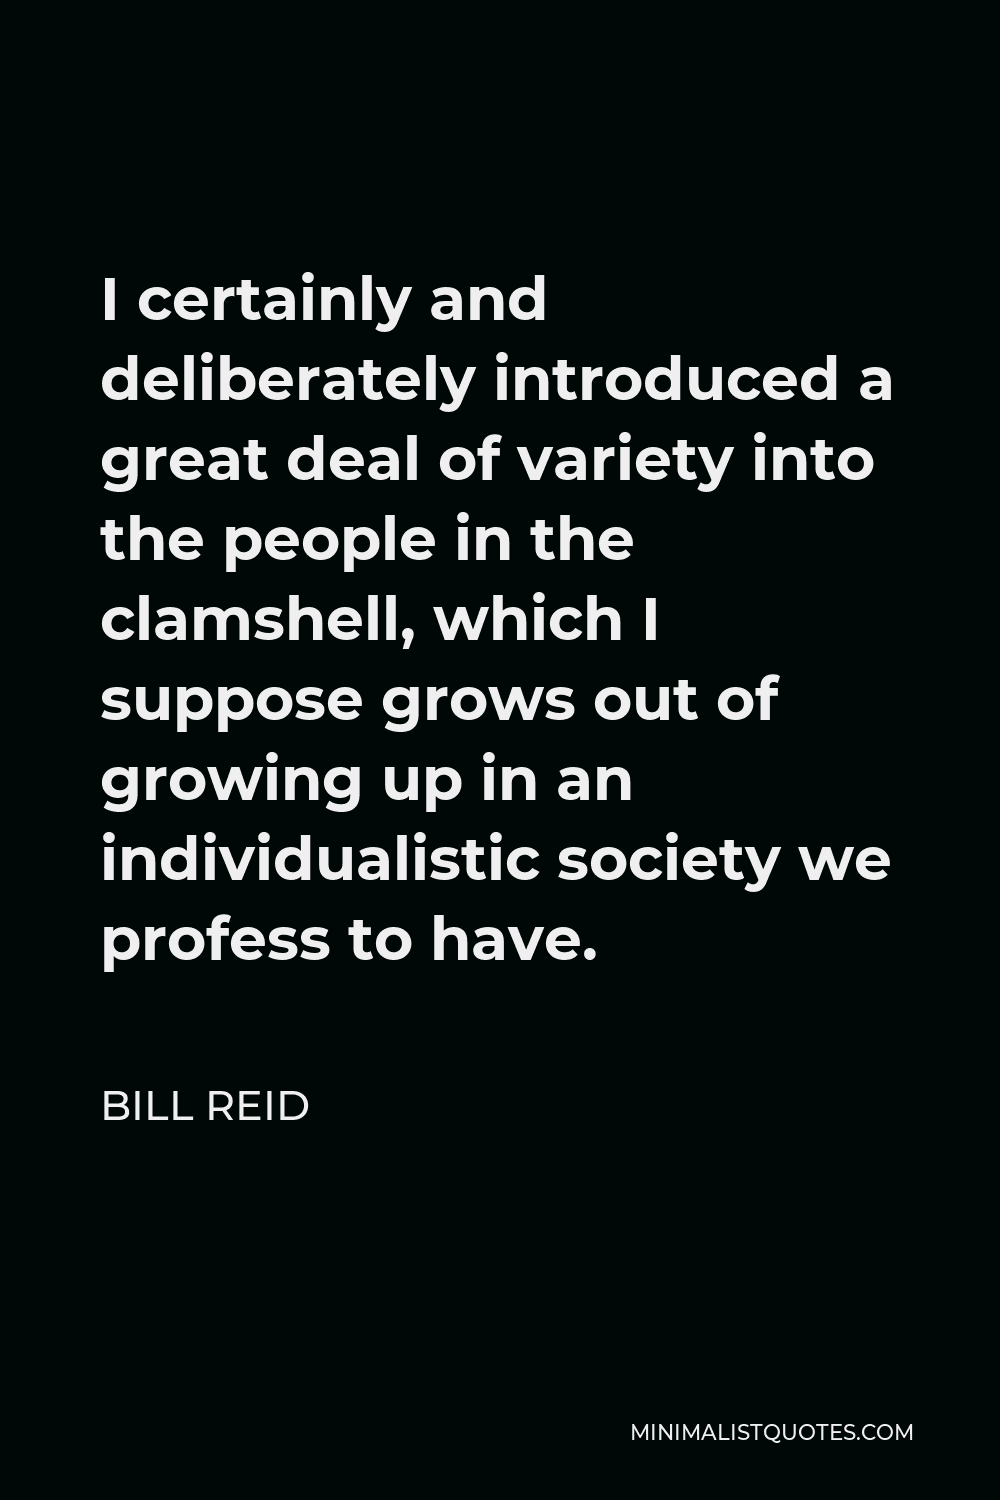 Bill Reid Quote - I certainly and deliberately introduced a great deal of variety into the people in the clamshell, which I suppose grows out of growing up in an individualistic society we profess to have.